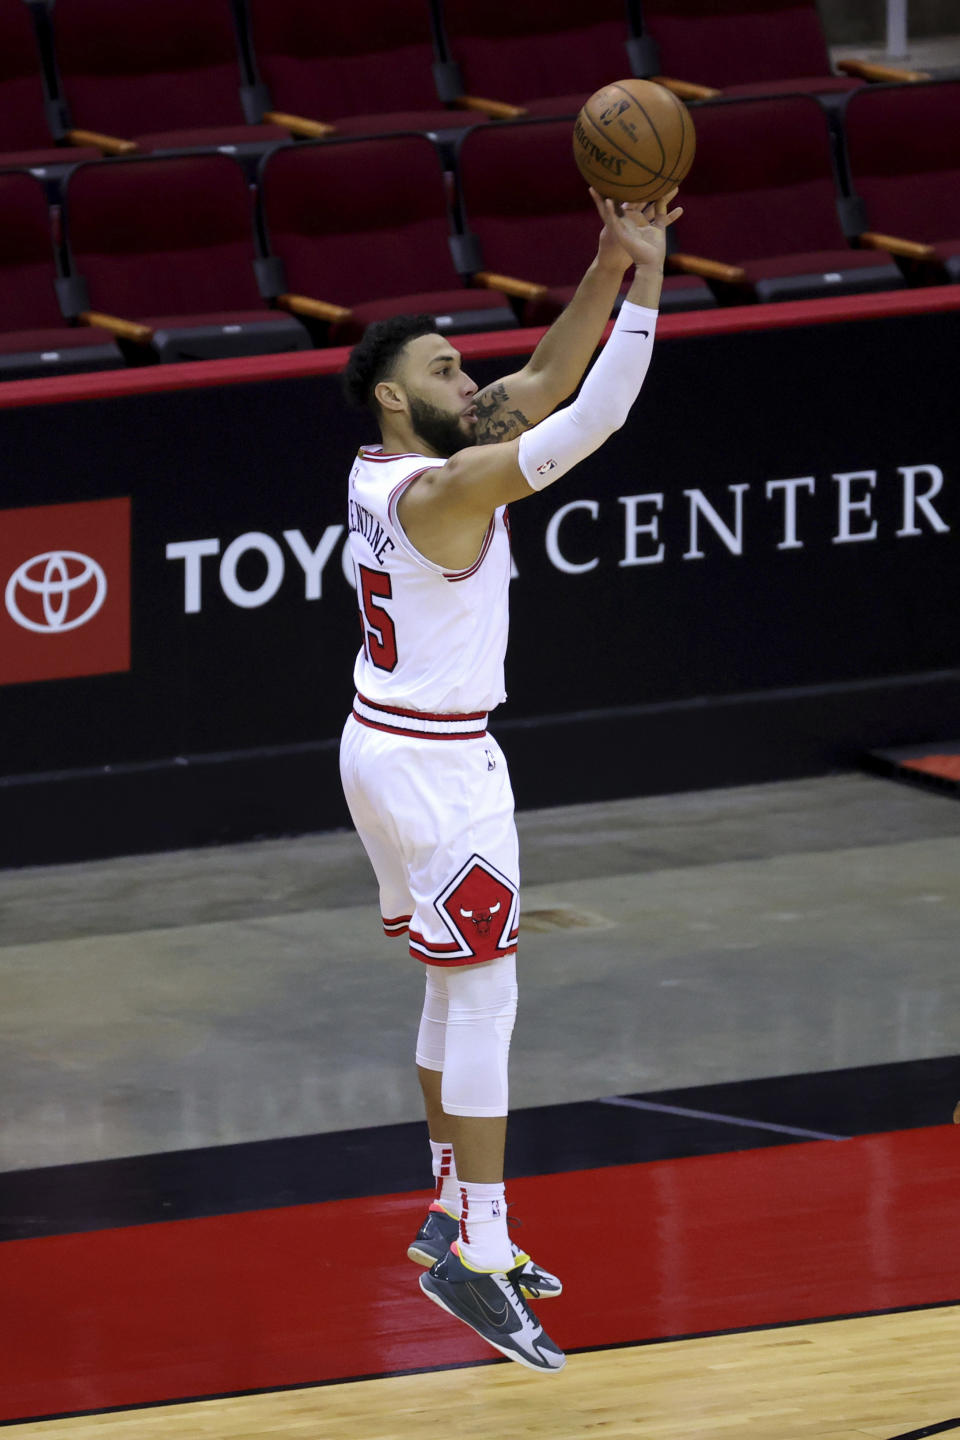 Chicago Bulls' Denzel Valentine shoots a basket against the Houston Rockets during the second quarter of an NBA basketball game Monday, Feb. 22, 2021, in Houston. (Carmen Mandato/Pool Photo via AP)